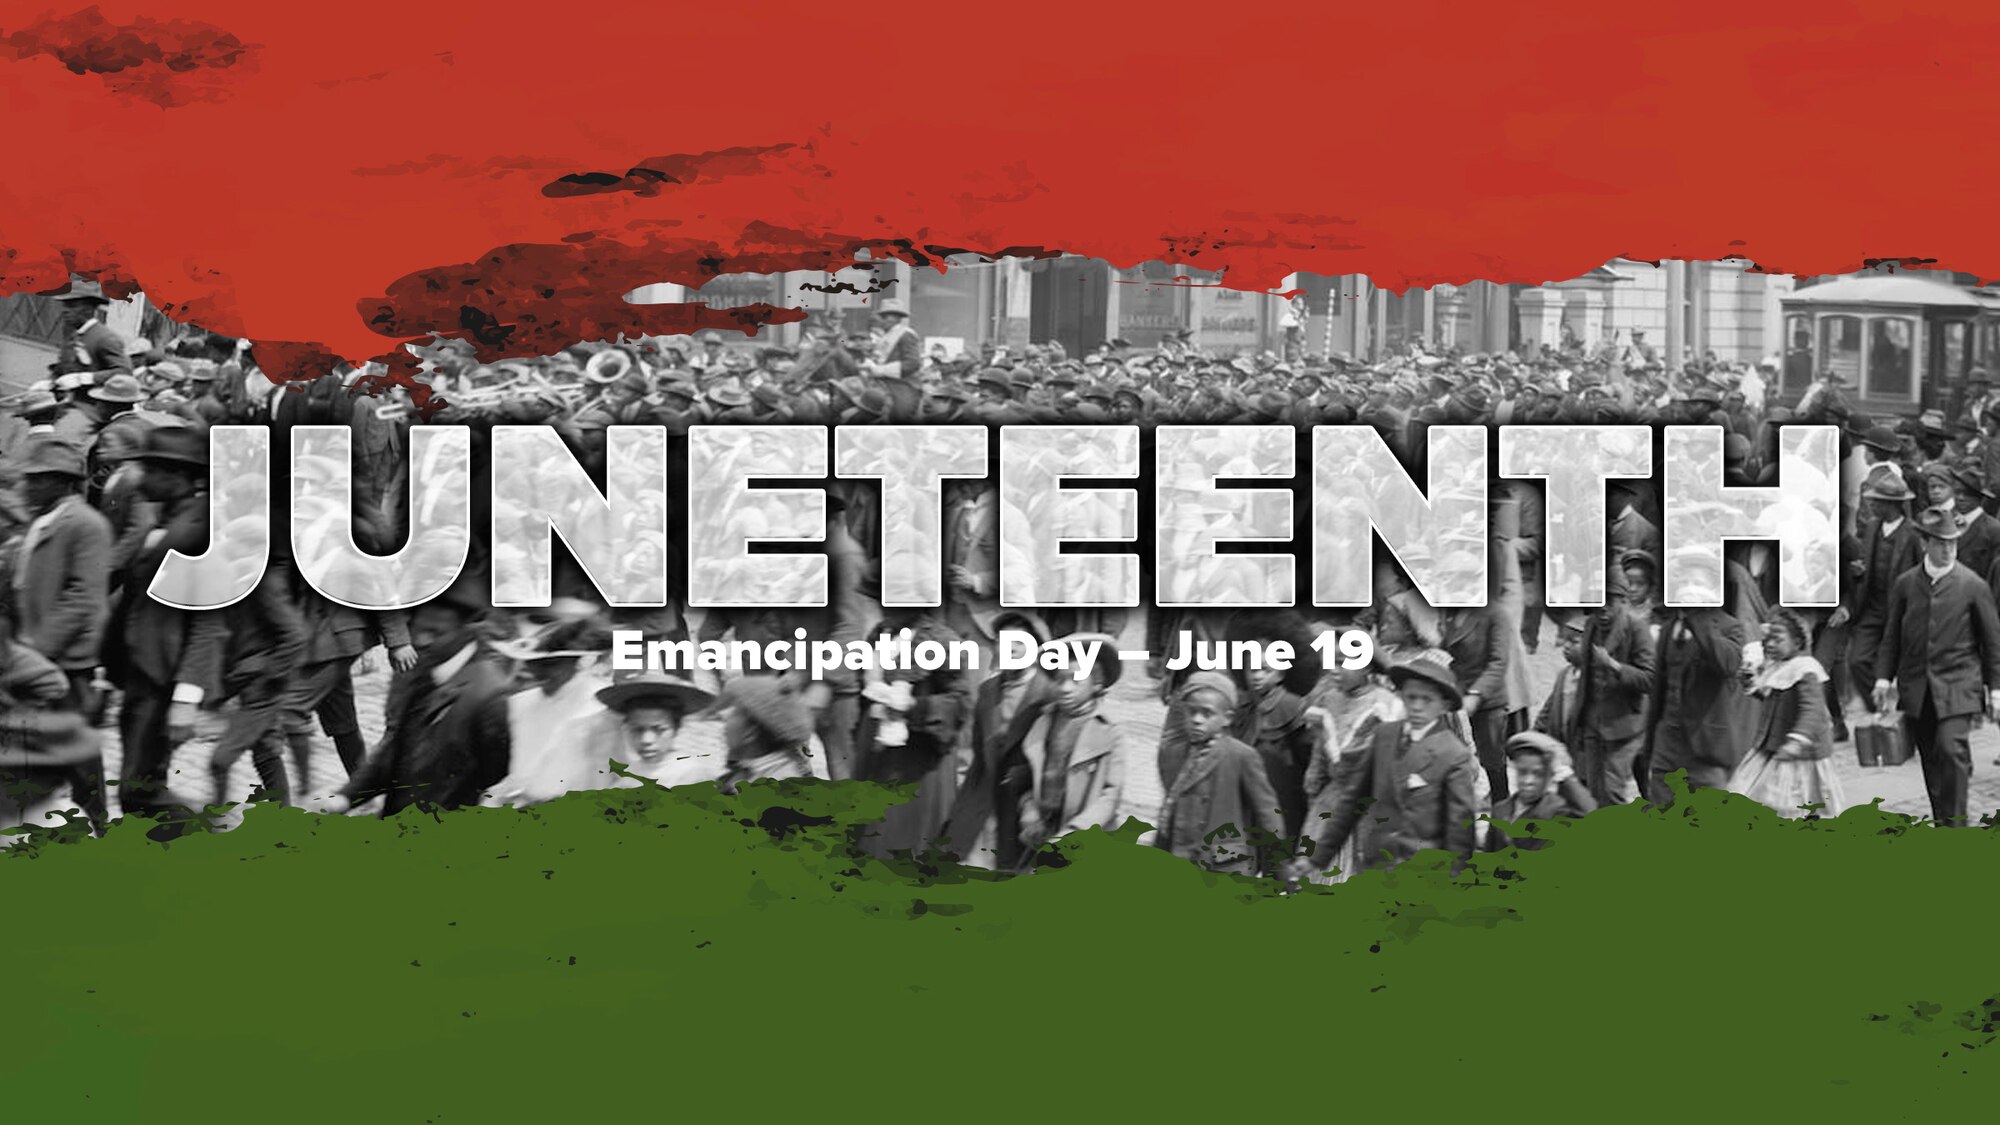 The word Juneteenth overlaid on top of a civil rights event in black and white